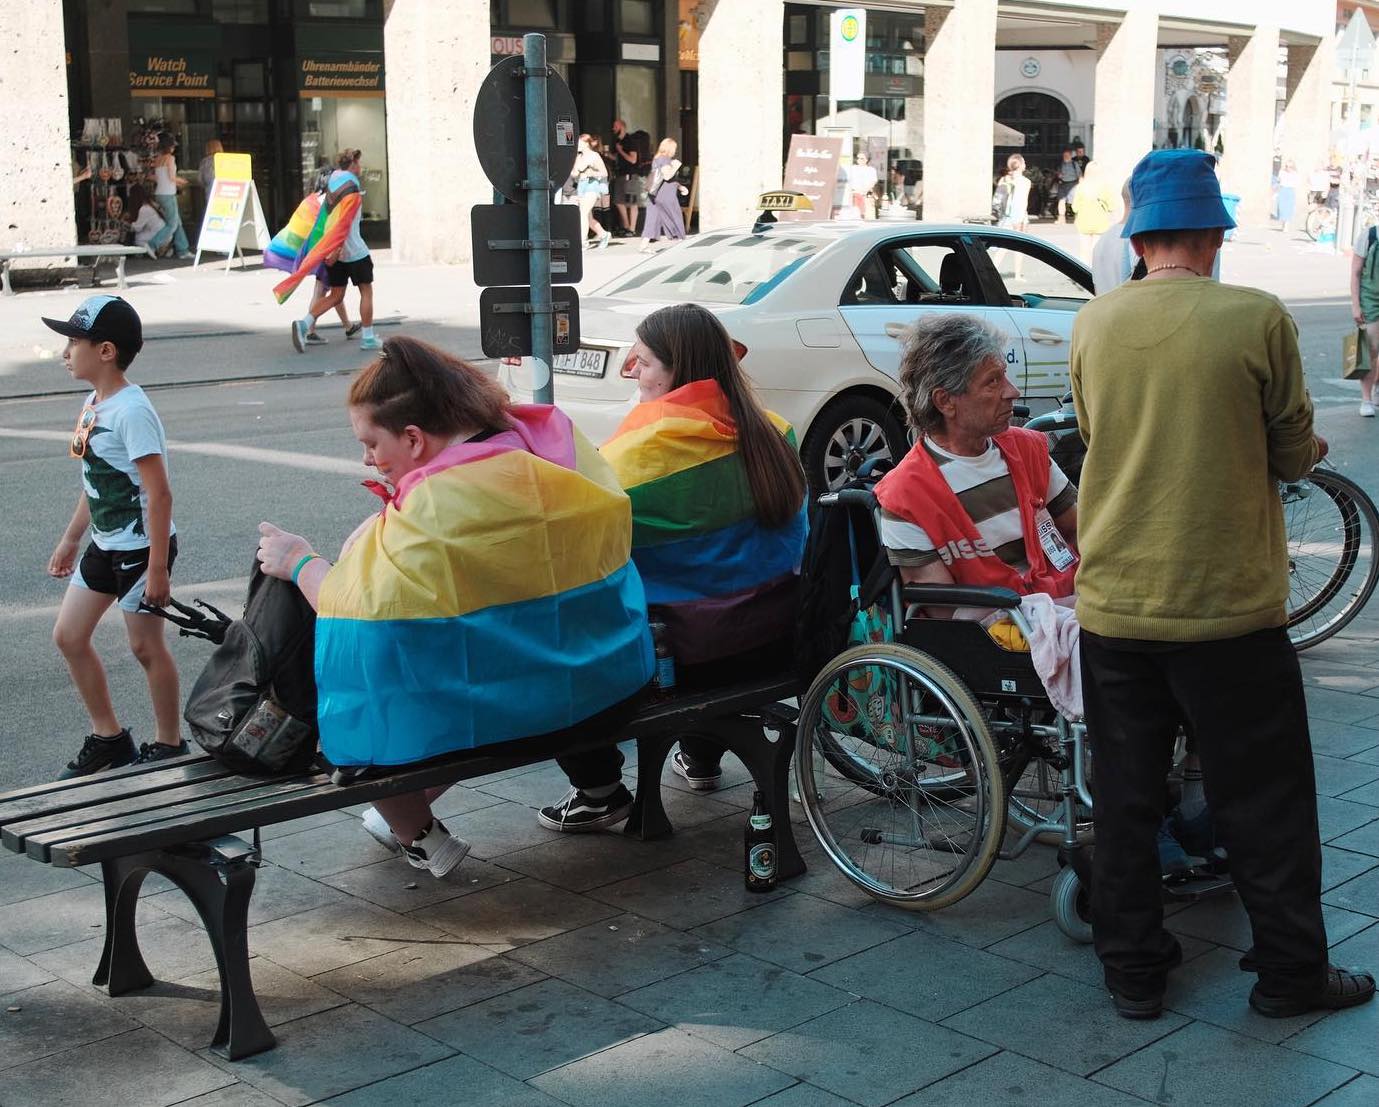 People wearing rainbow flags as capes sitting on bench